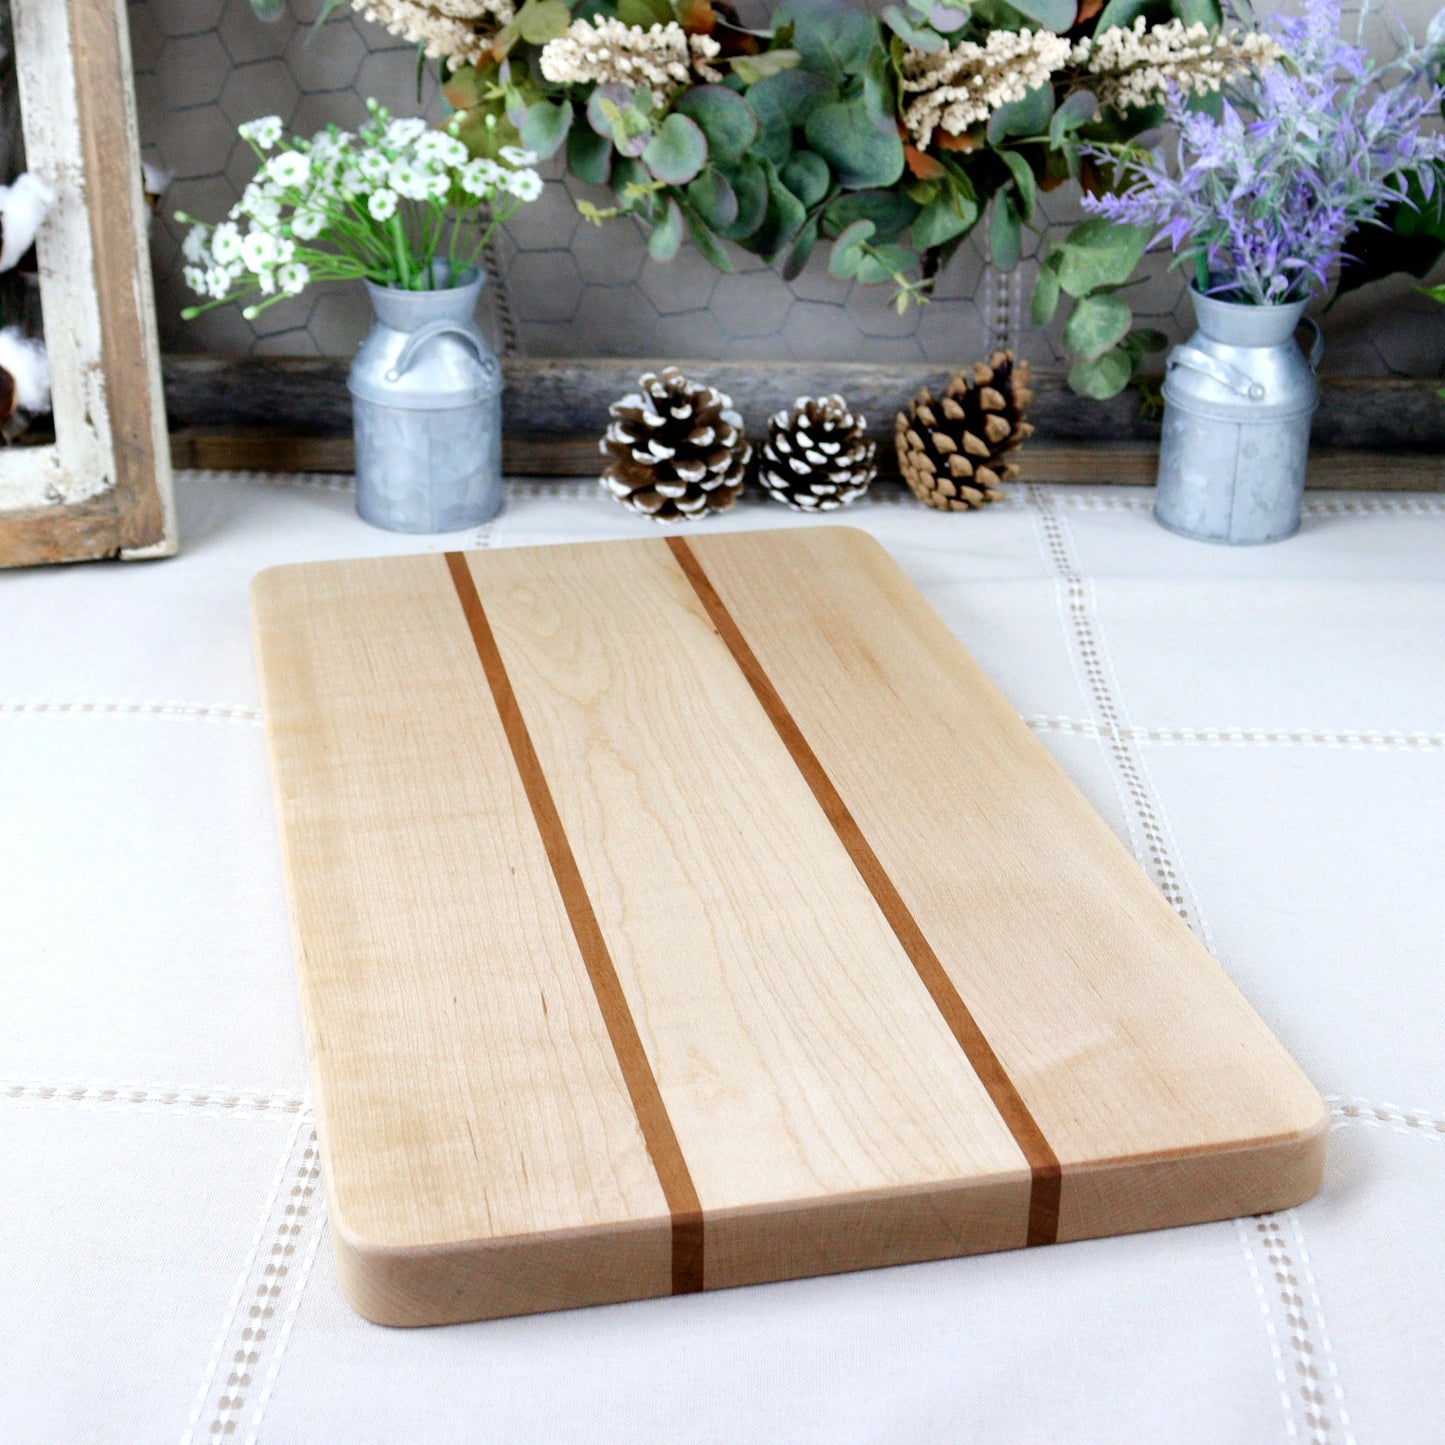 2-Piece Maple Serving Set: Handcrafted  Wood Serving Tray & Matching Cutting Board